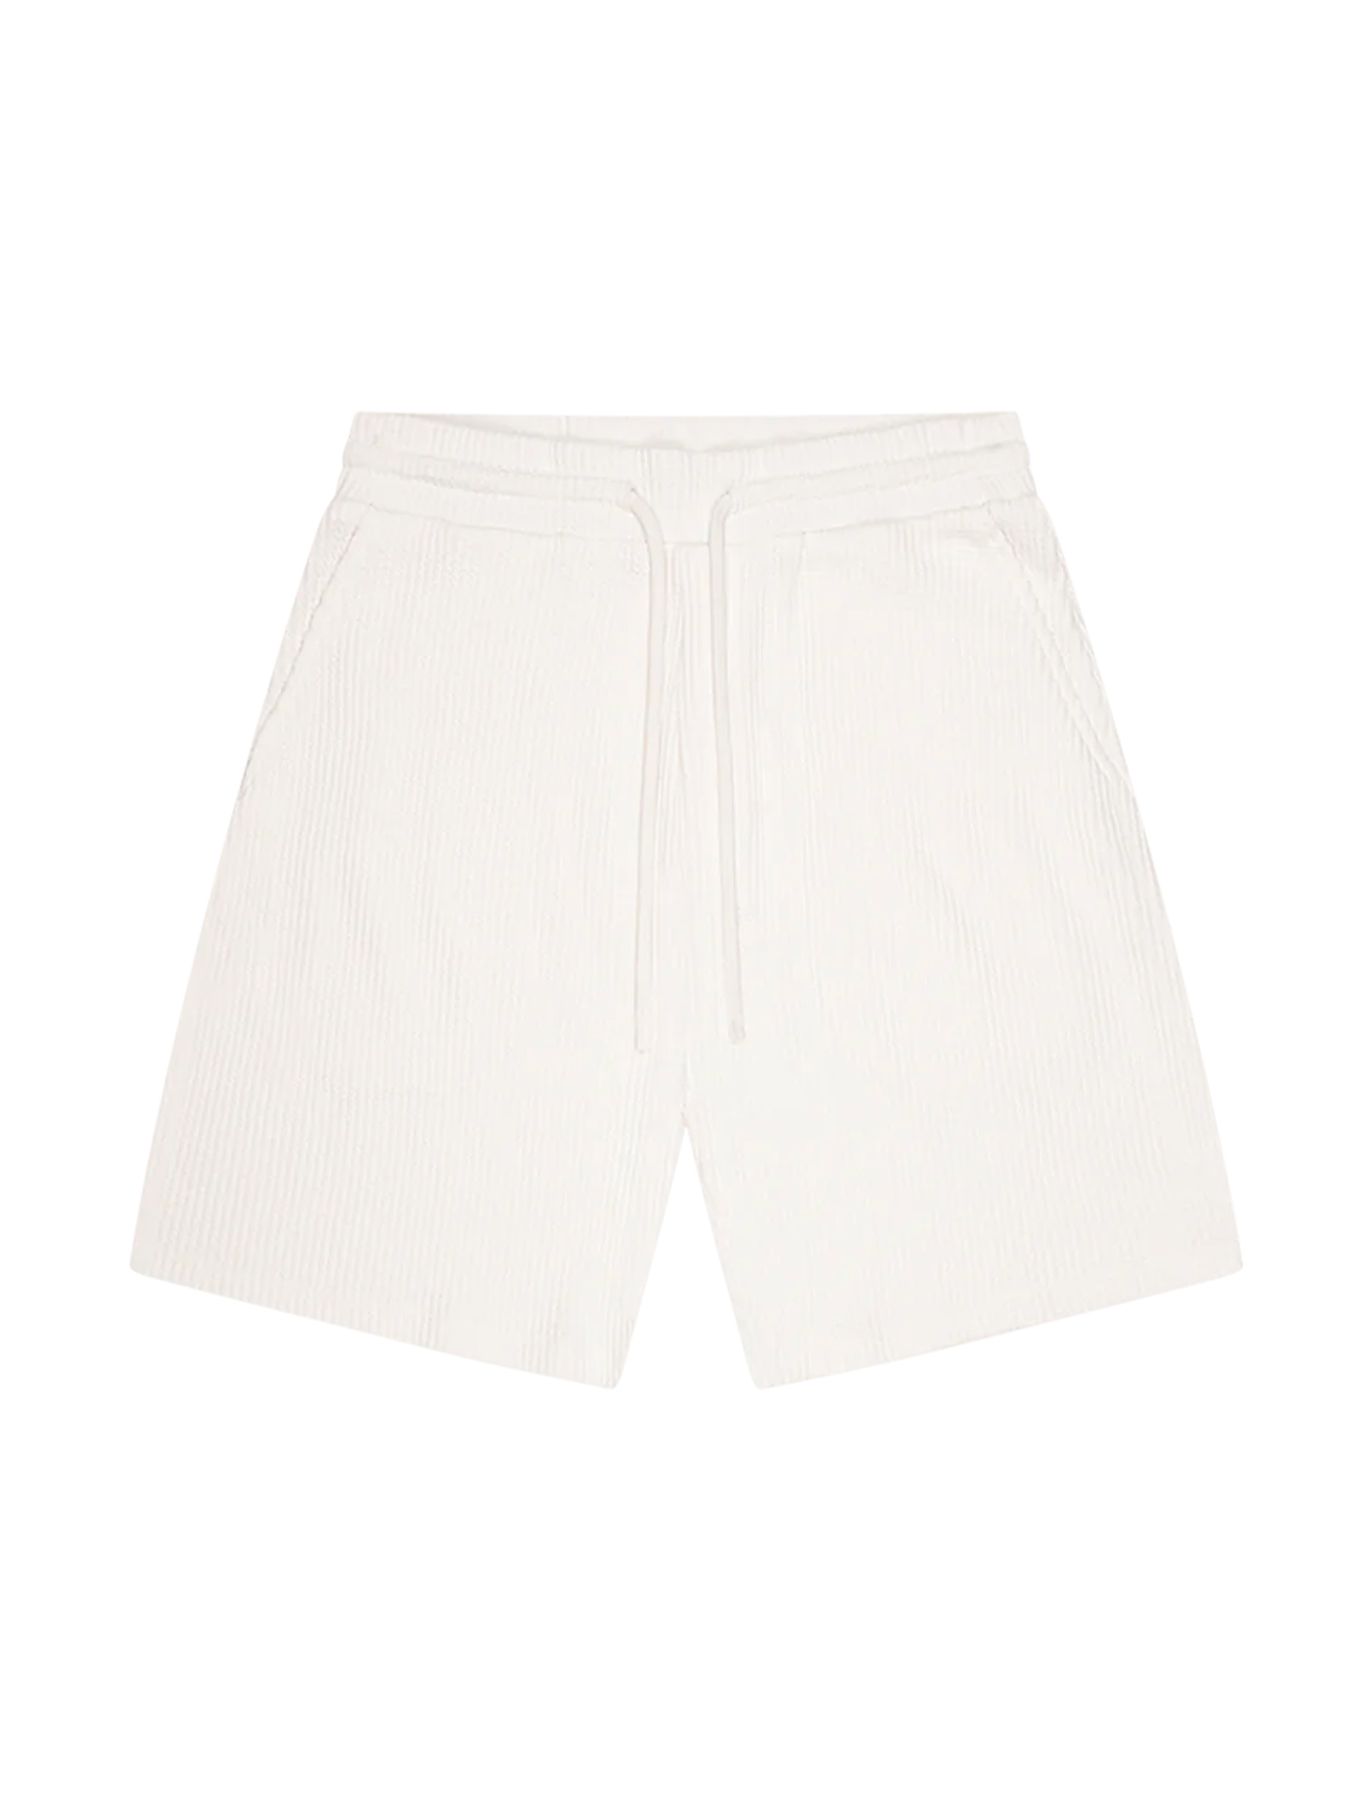 Quotrell Playa shorts Off White 2900146970046